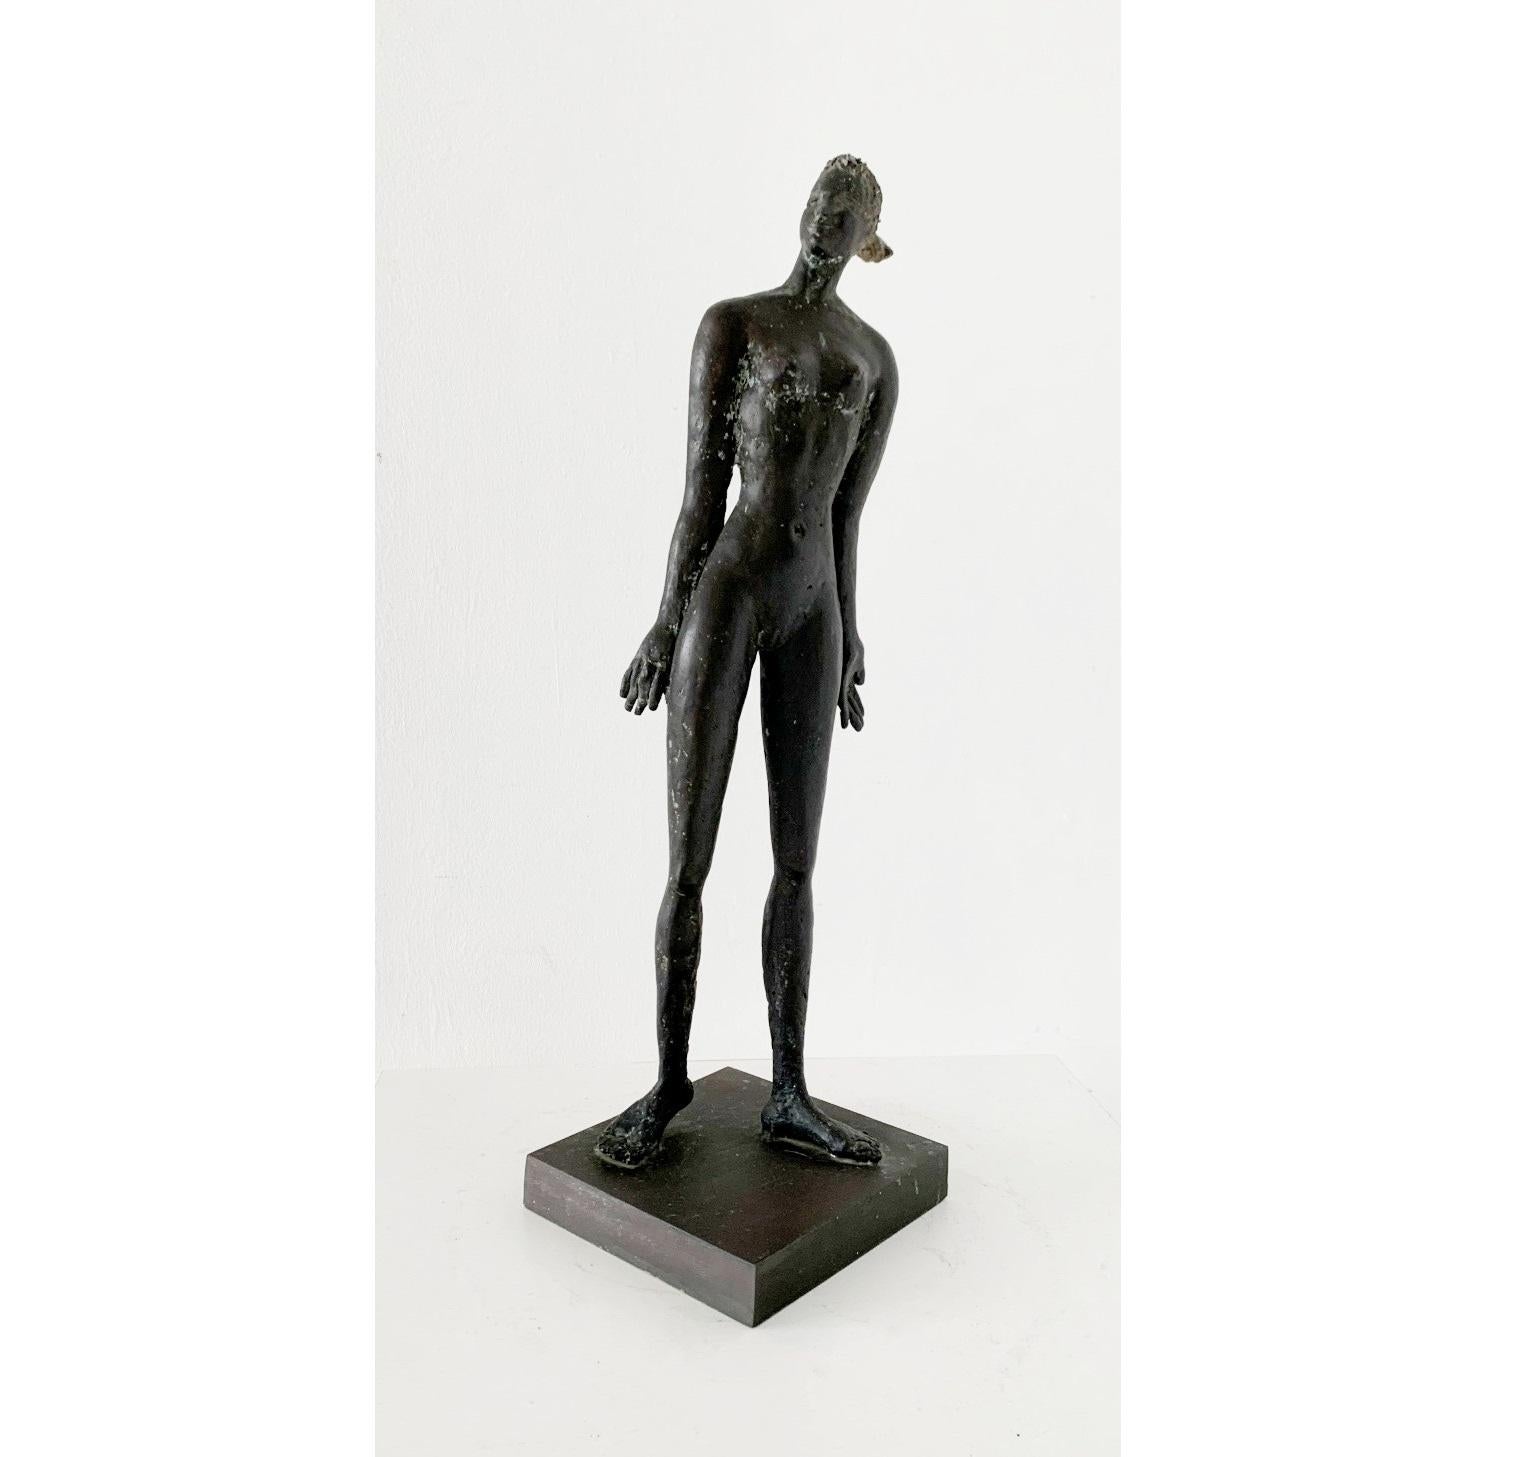 Contemporary bronze figurative sculpture of standing woman by Italian artist, professor Giuseppe del Debbio. Sculpture is signed on the base. 

GIUSEPPE DEL DEBBIO ( 1950-2019)
Professor at the Academy of Fine Arts in Florence, Italy. He is